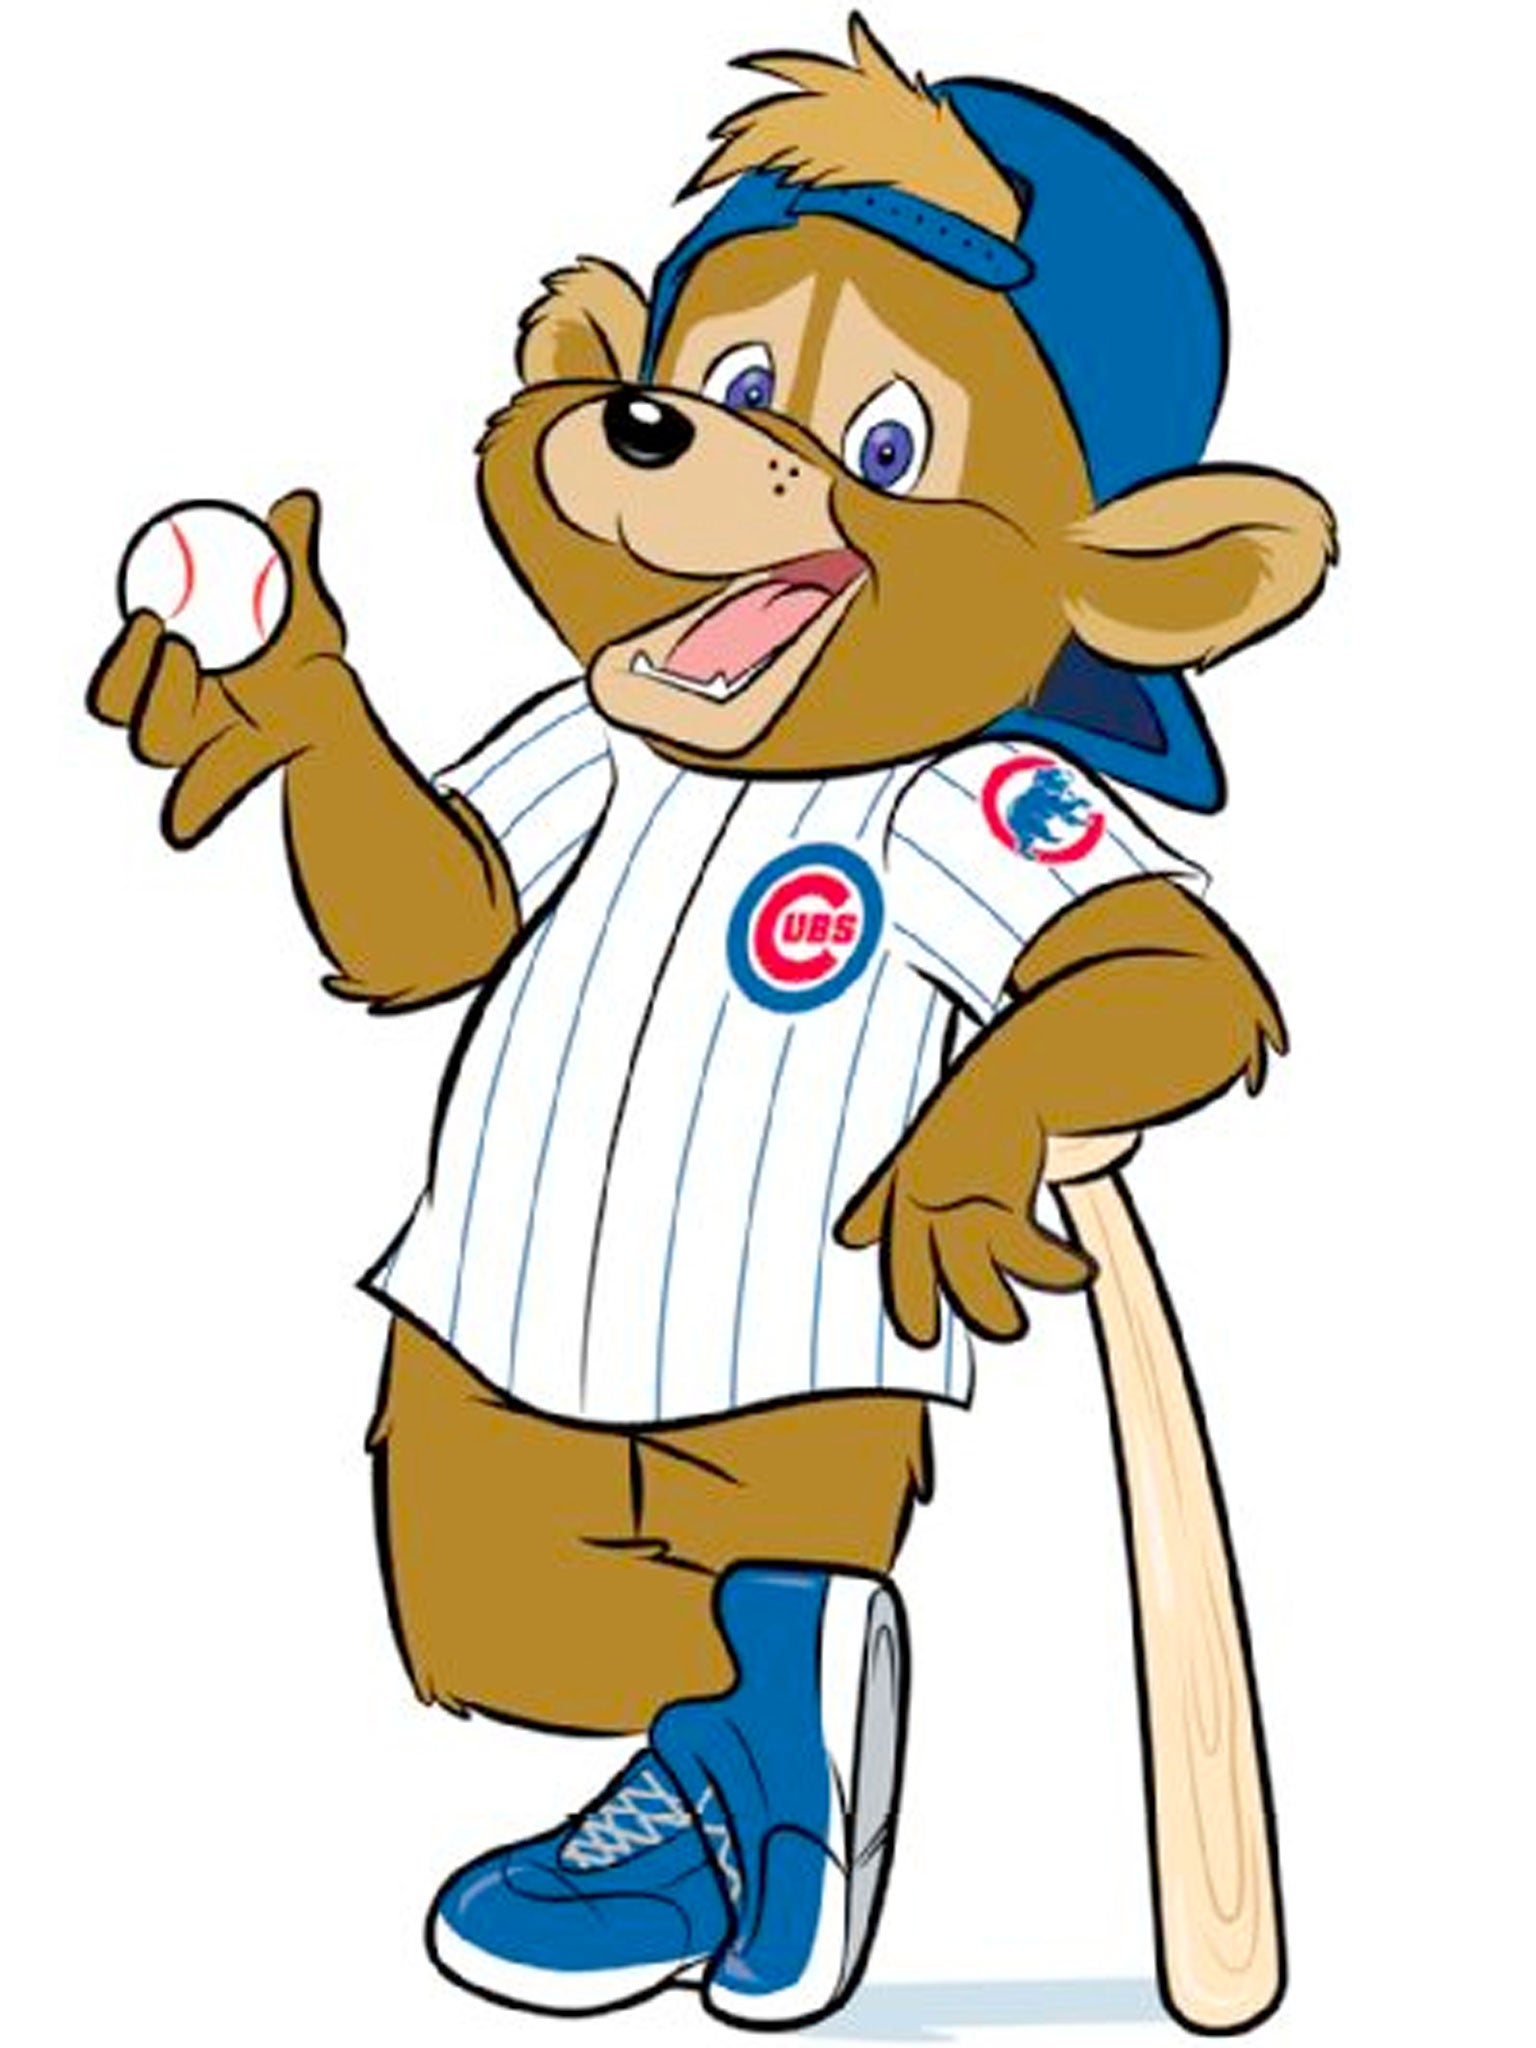 This is the official image of Clark the Cub which CSN Chicago should have used...